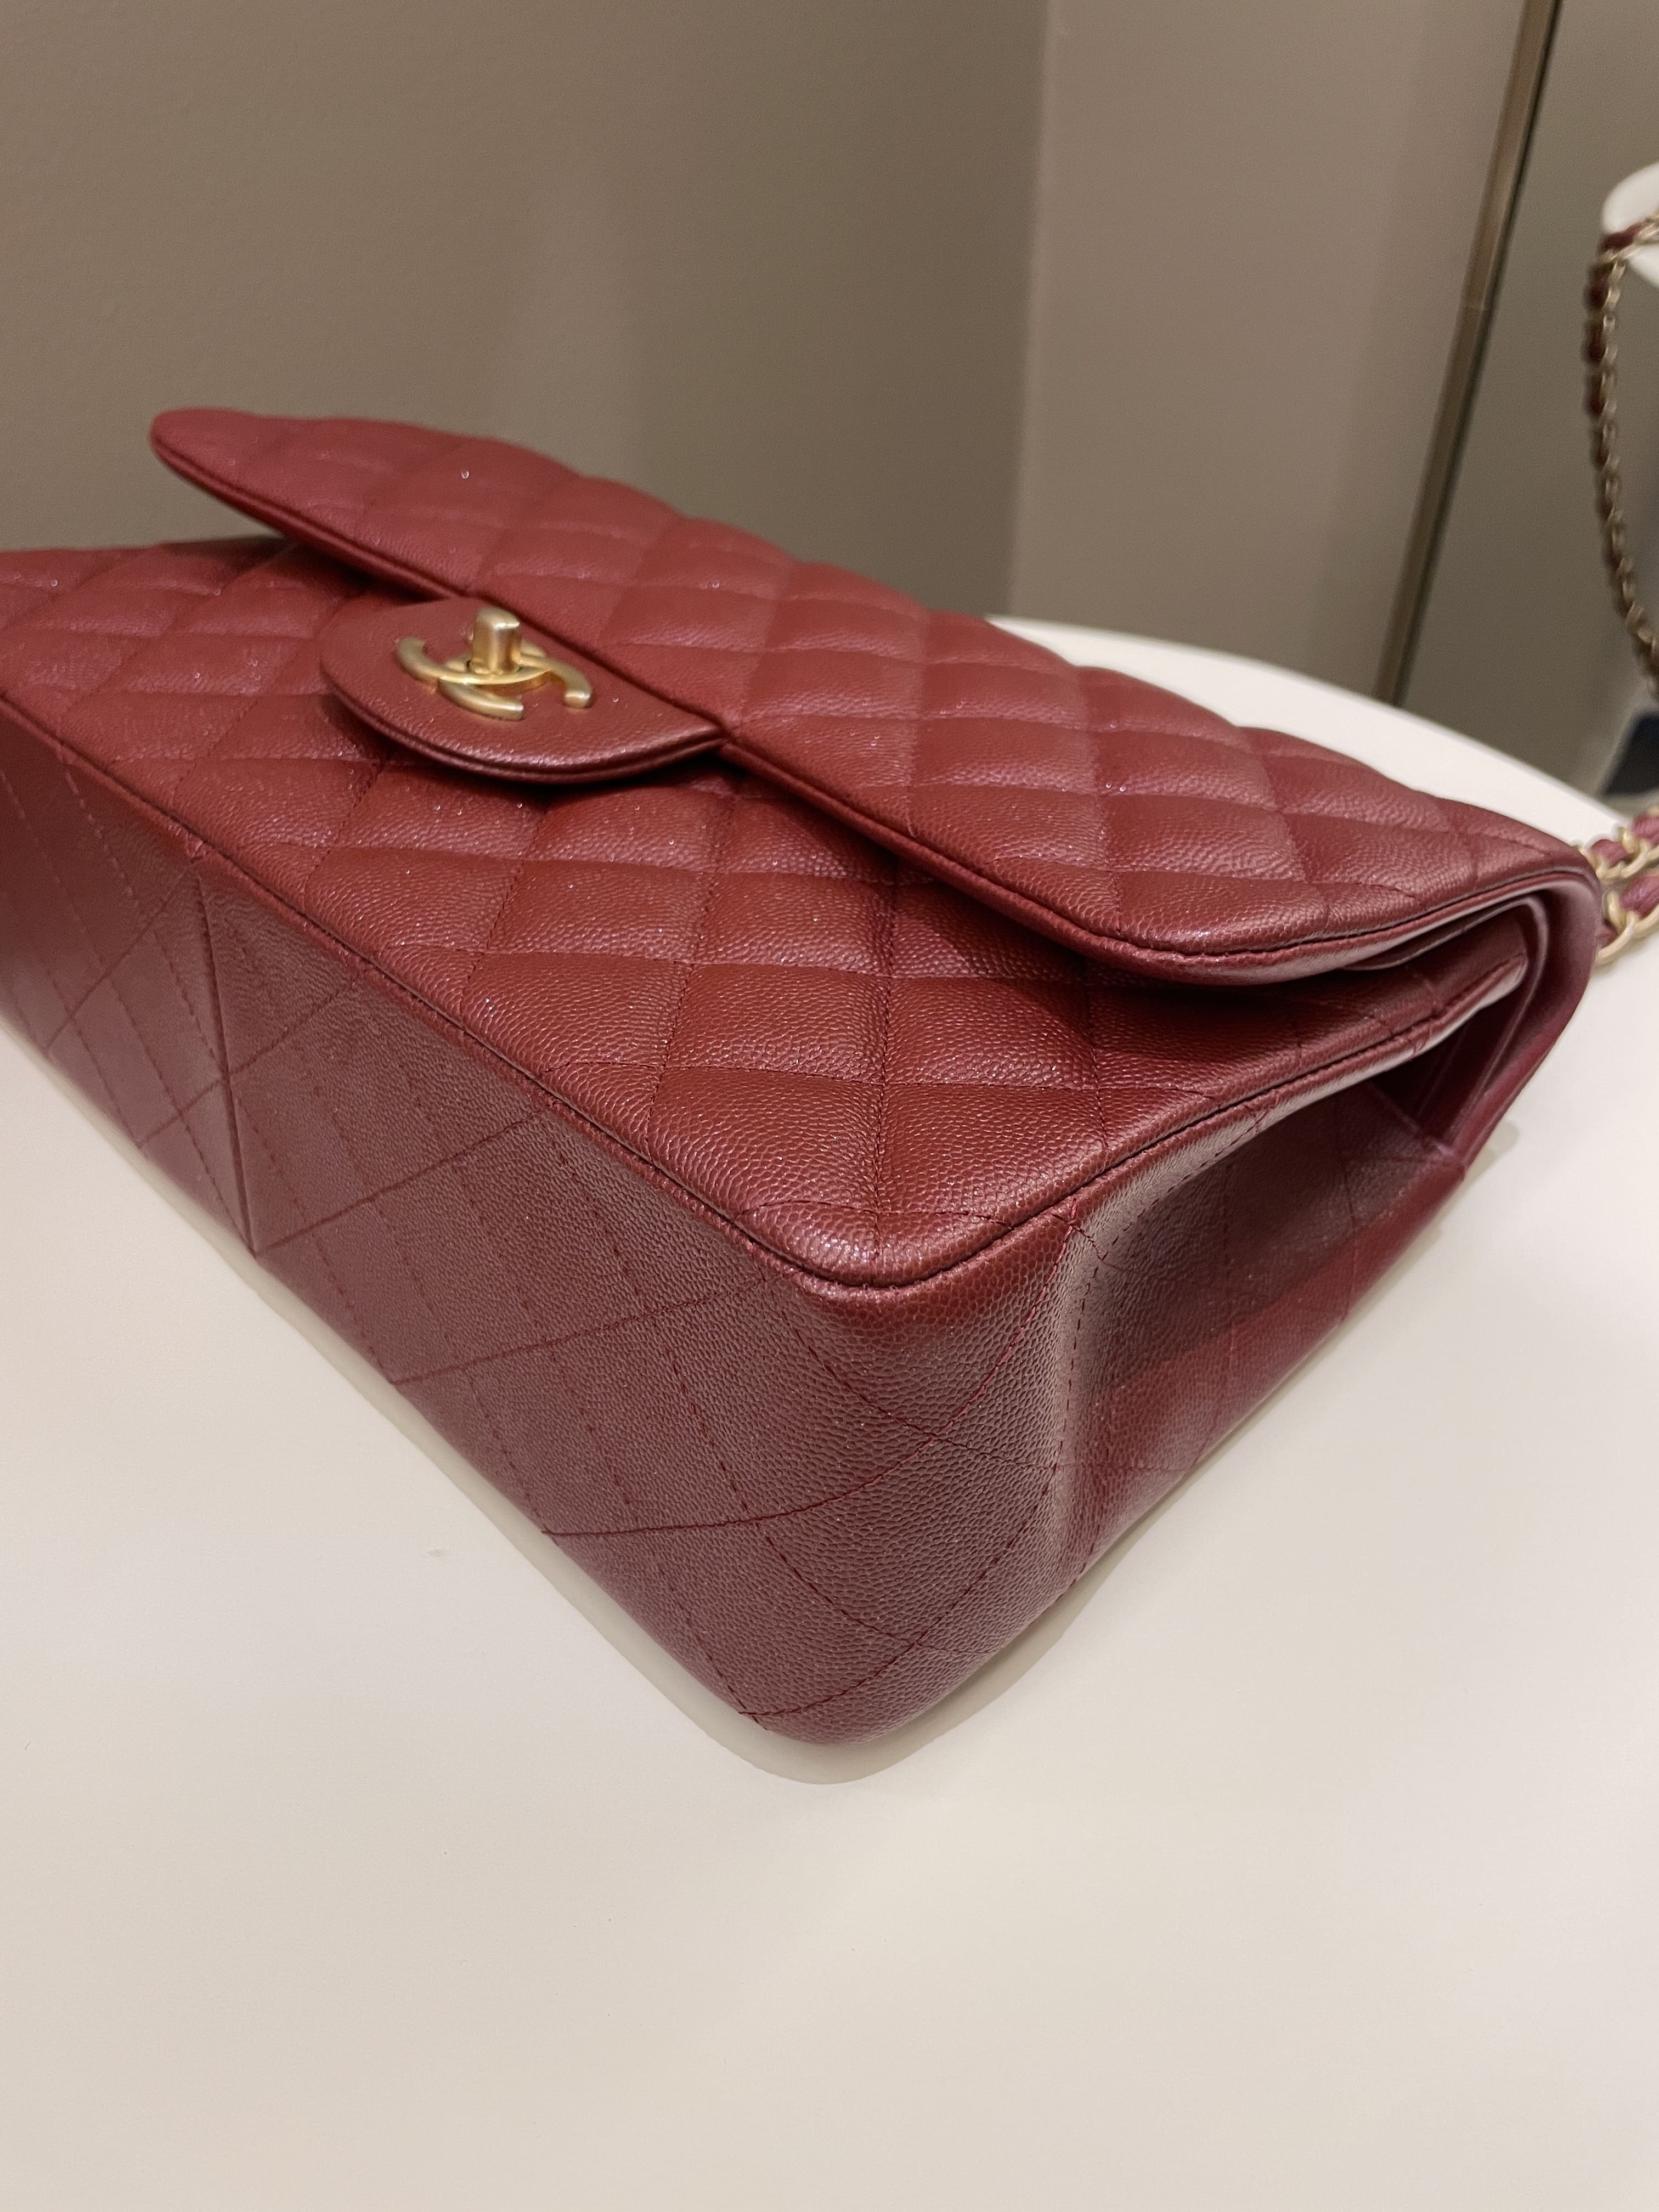 Chanel 18C Classic Quilted Jumbo Double Flap Iridescent Burgundy Caviar Leather